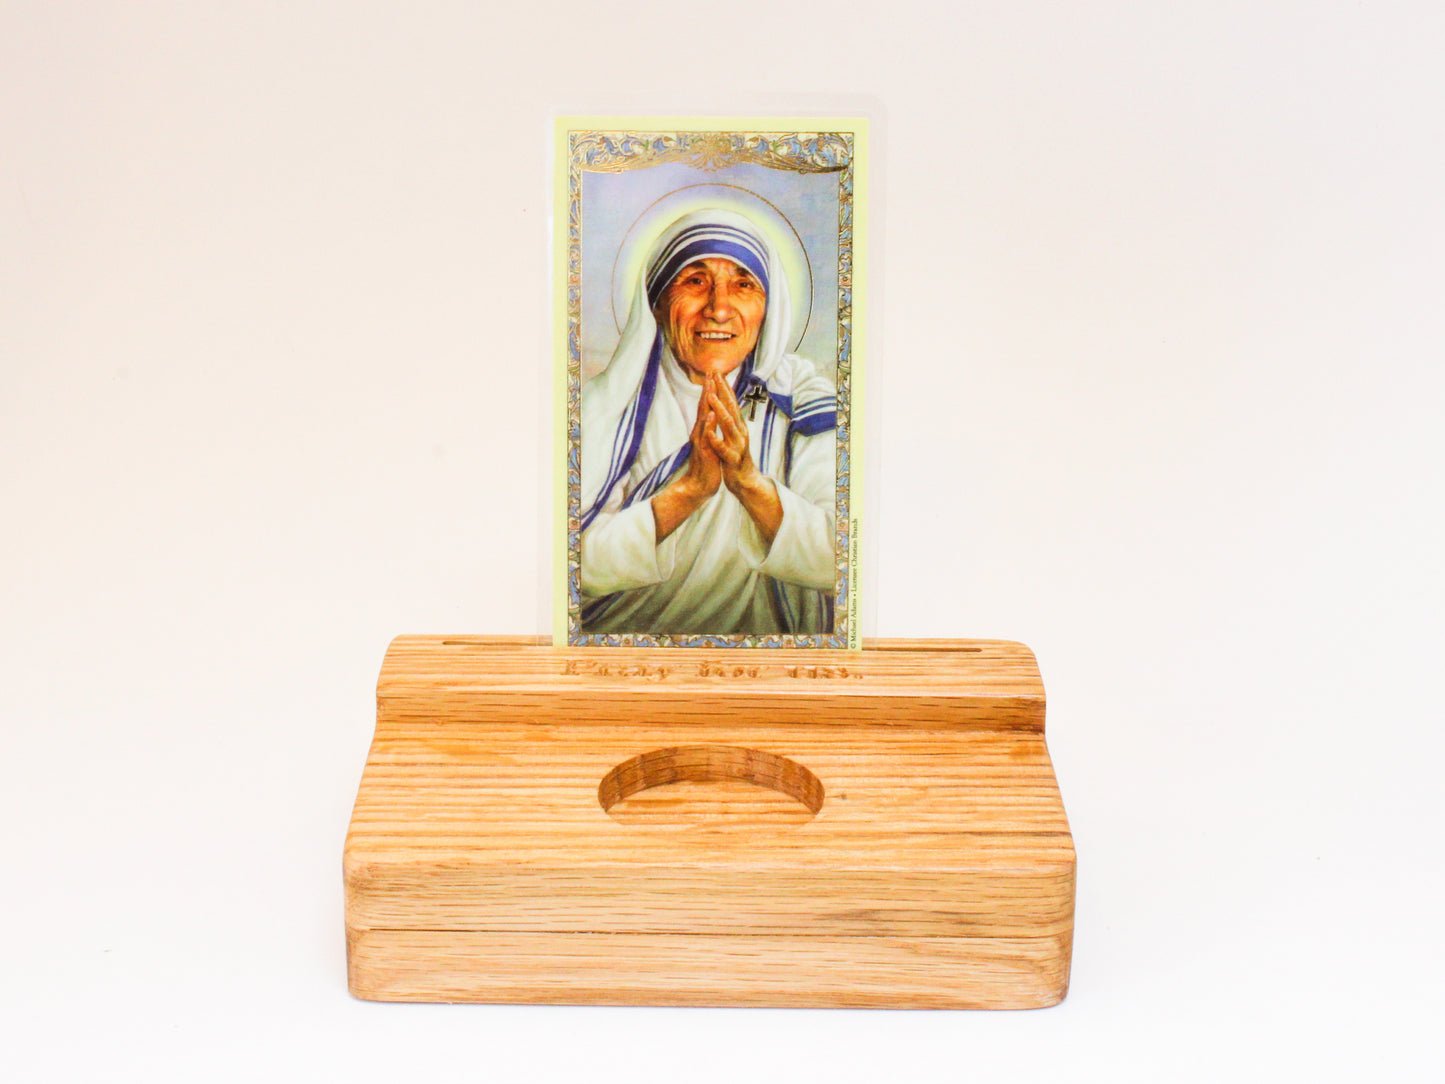 Large wooden holy card stand, prayer card holder, with space for storing extra holy cards and room for a votive candle. 